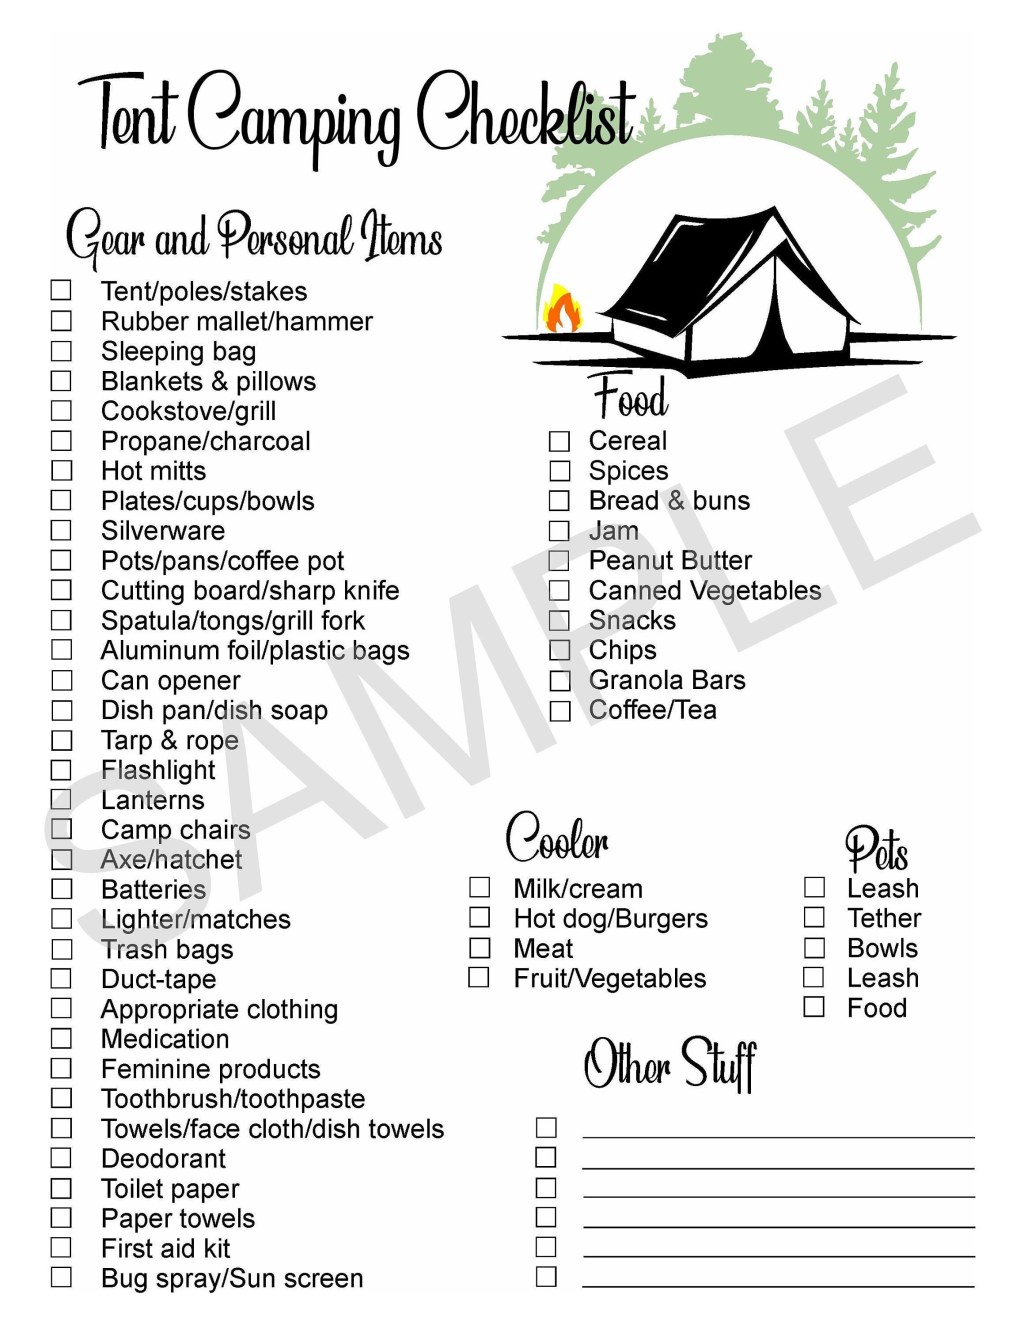 Picture of: Tent Camping Checklist